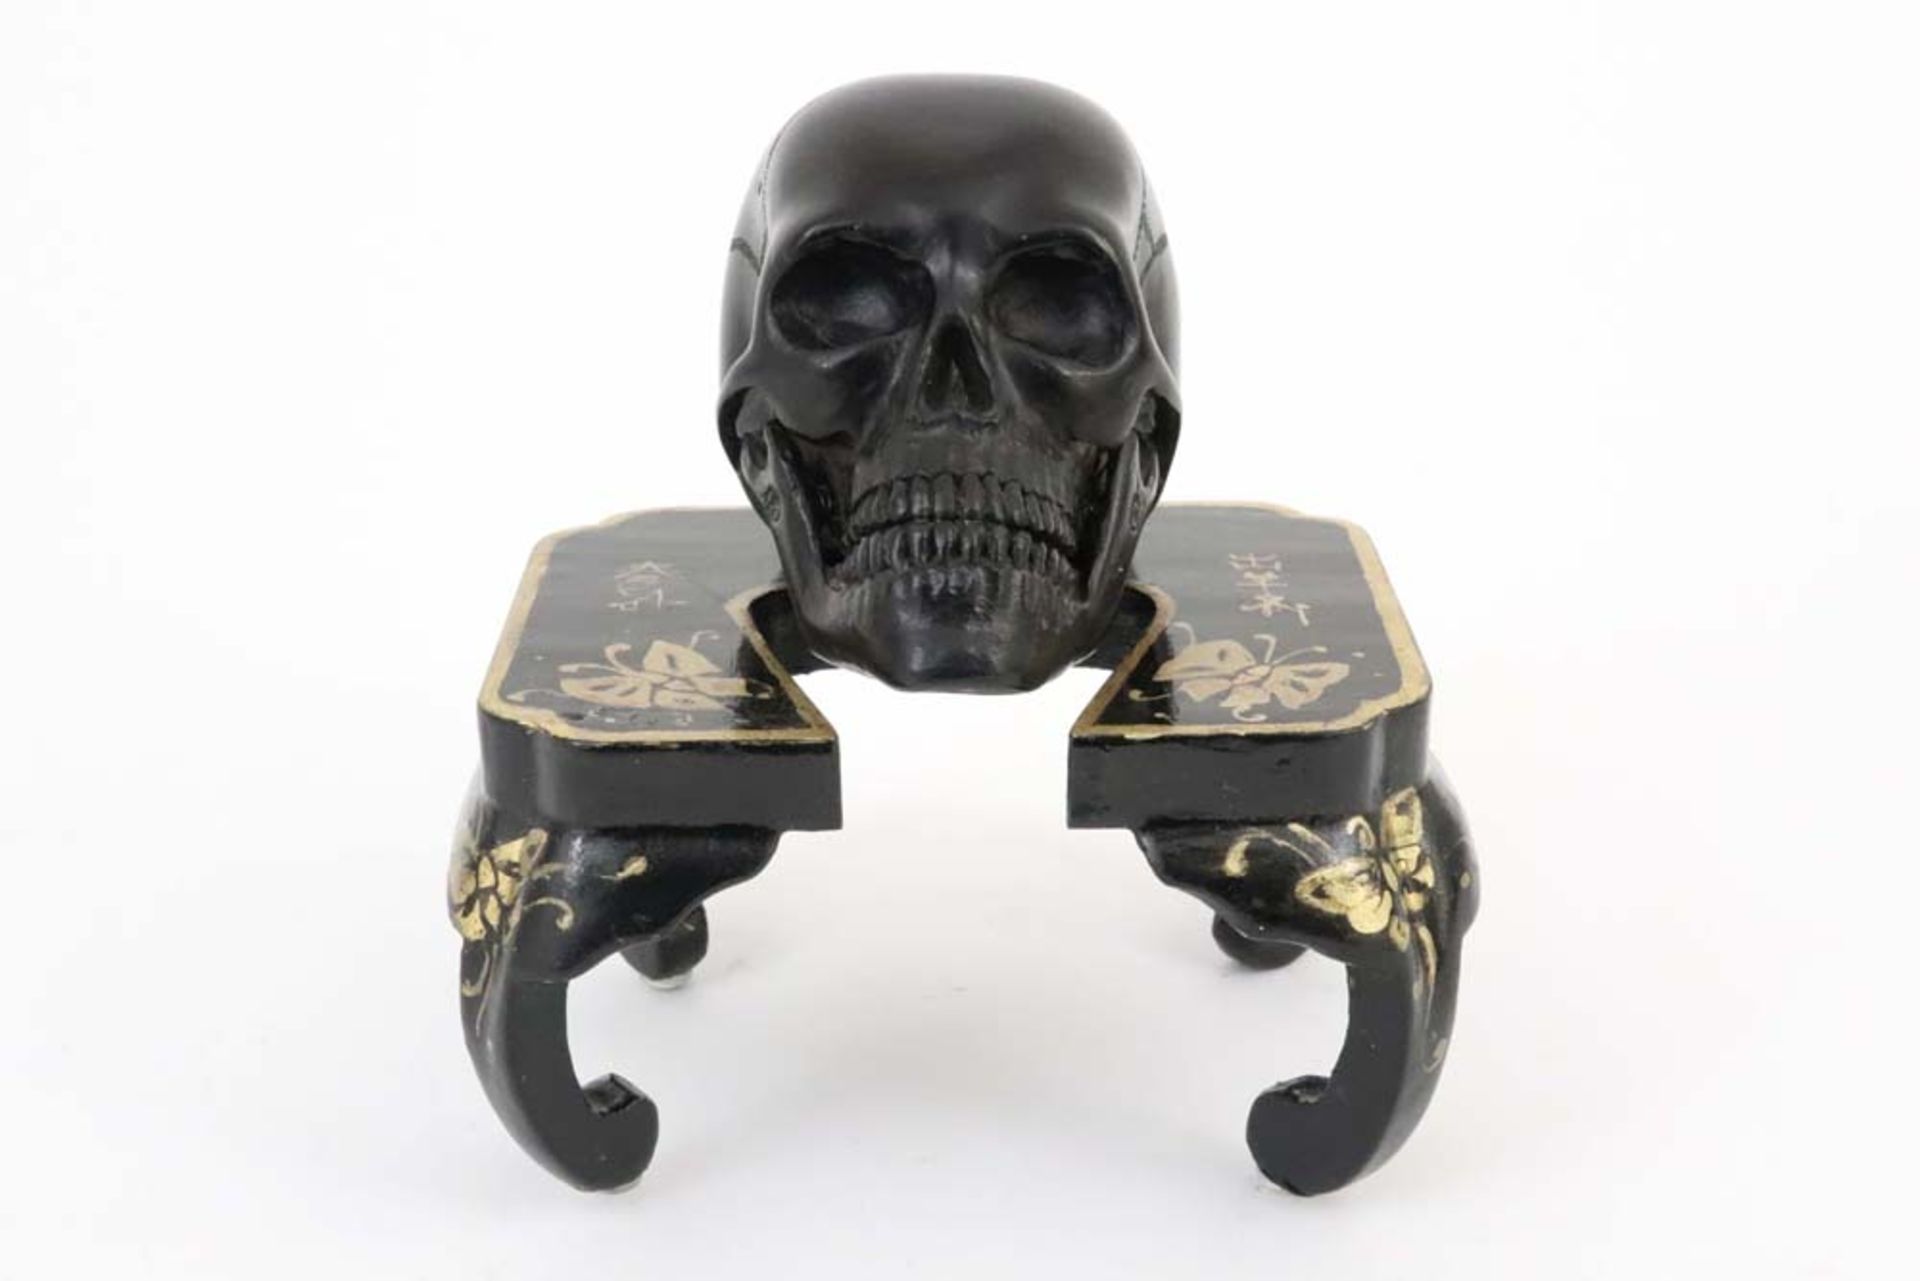 antique Japanese Meiji period sculpture with a wooden skull on a lacquered table || Antieke